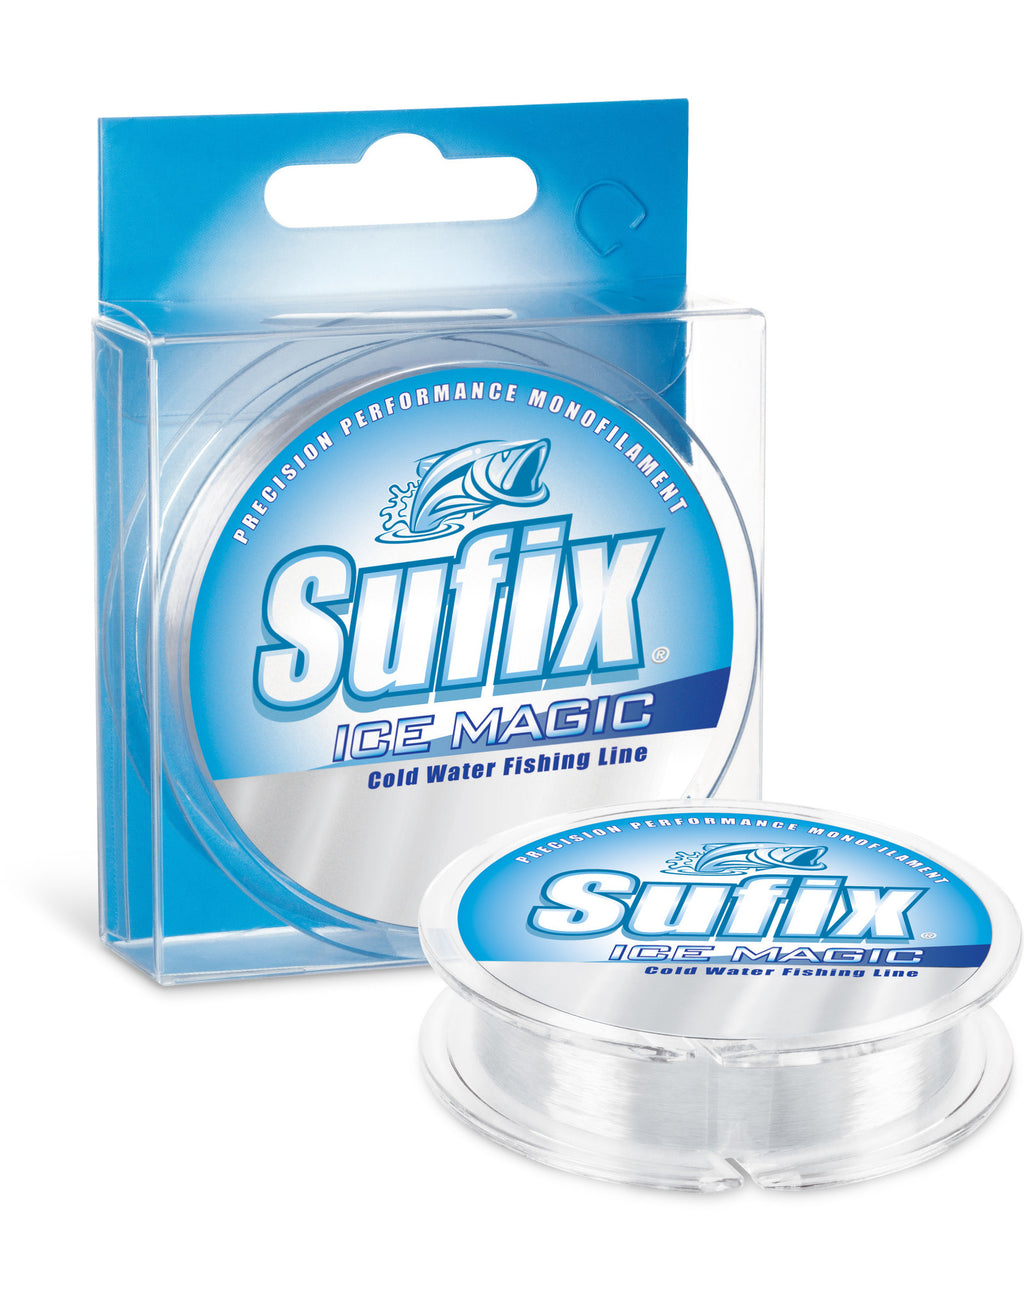 Sufix Ice Magic Cold Water Fishing Line 300yds